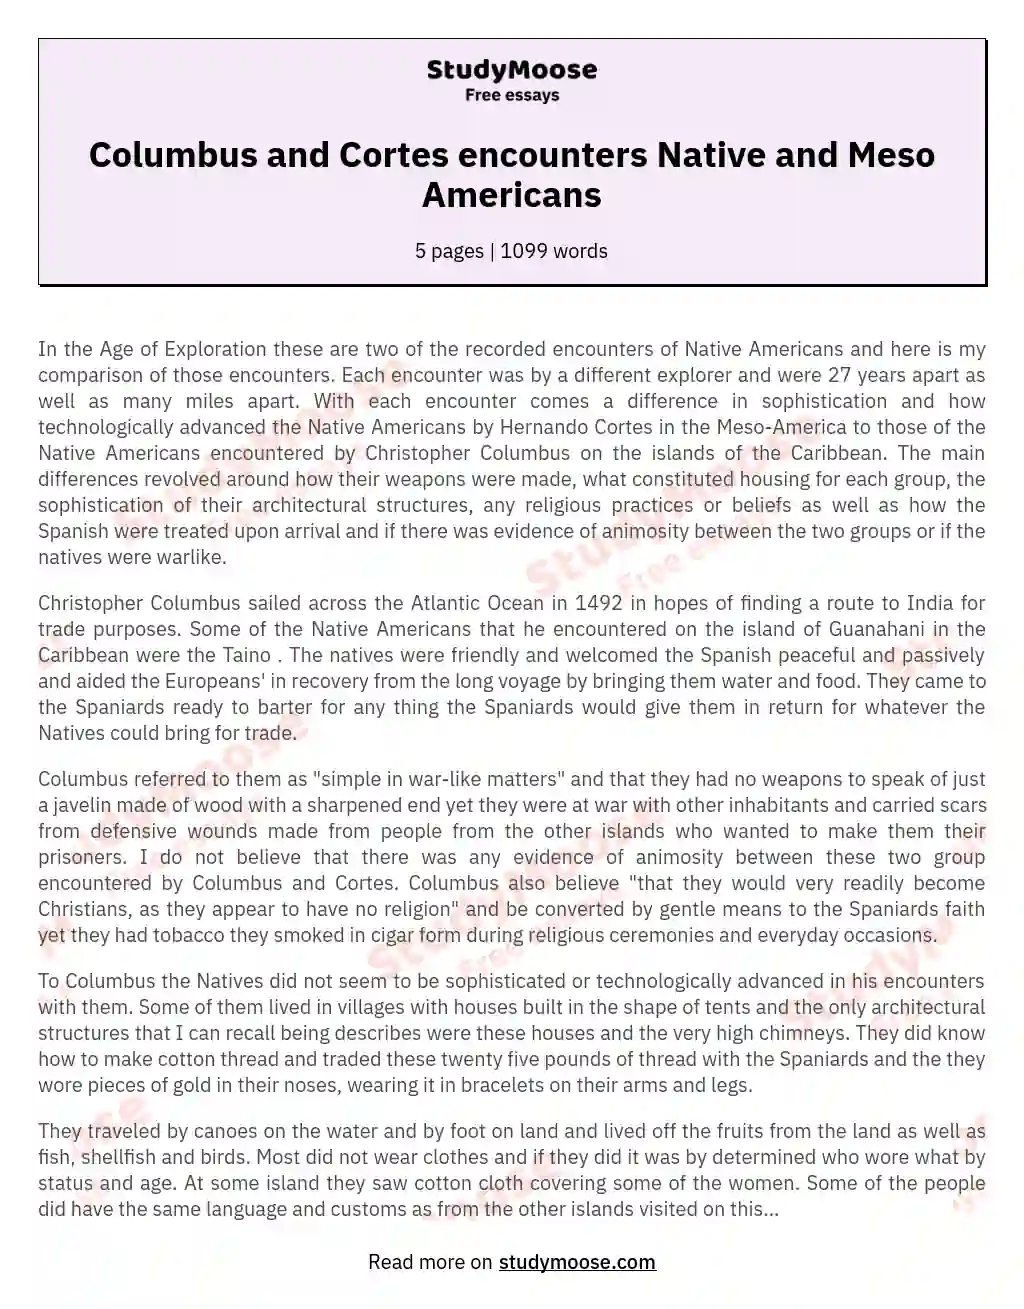 Columbus and Cortes encounters Native and Meso Americans